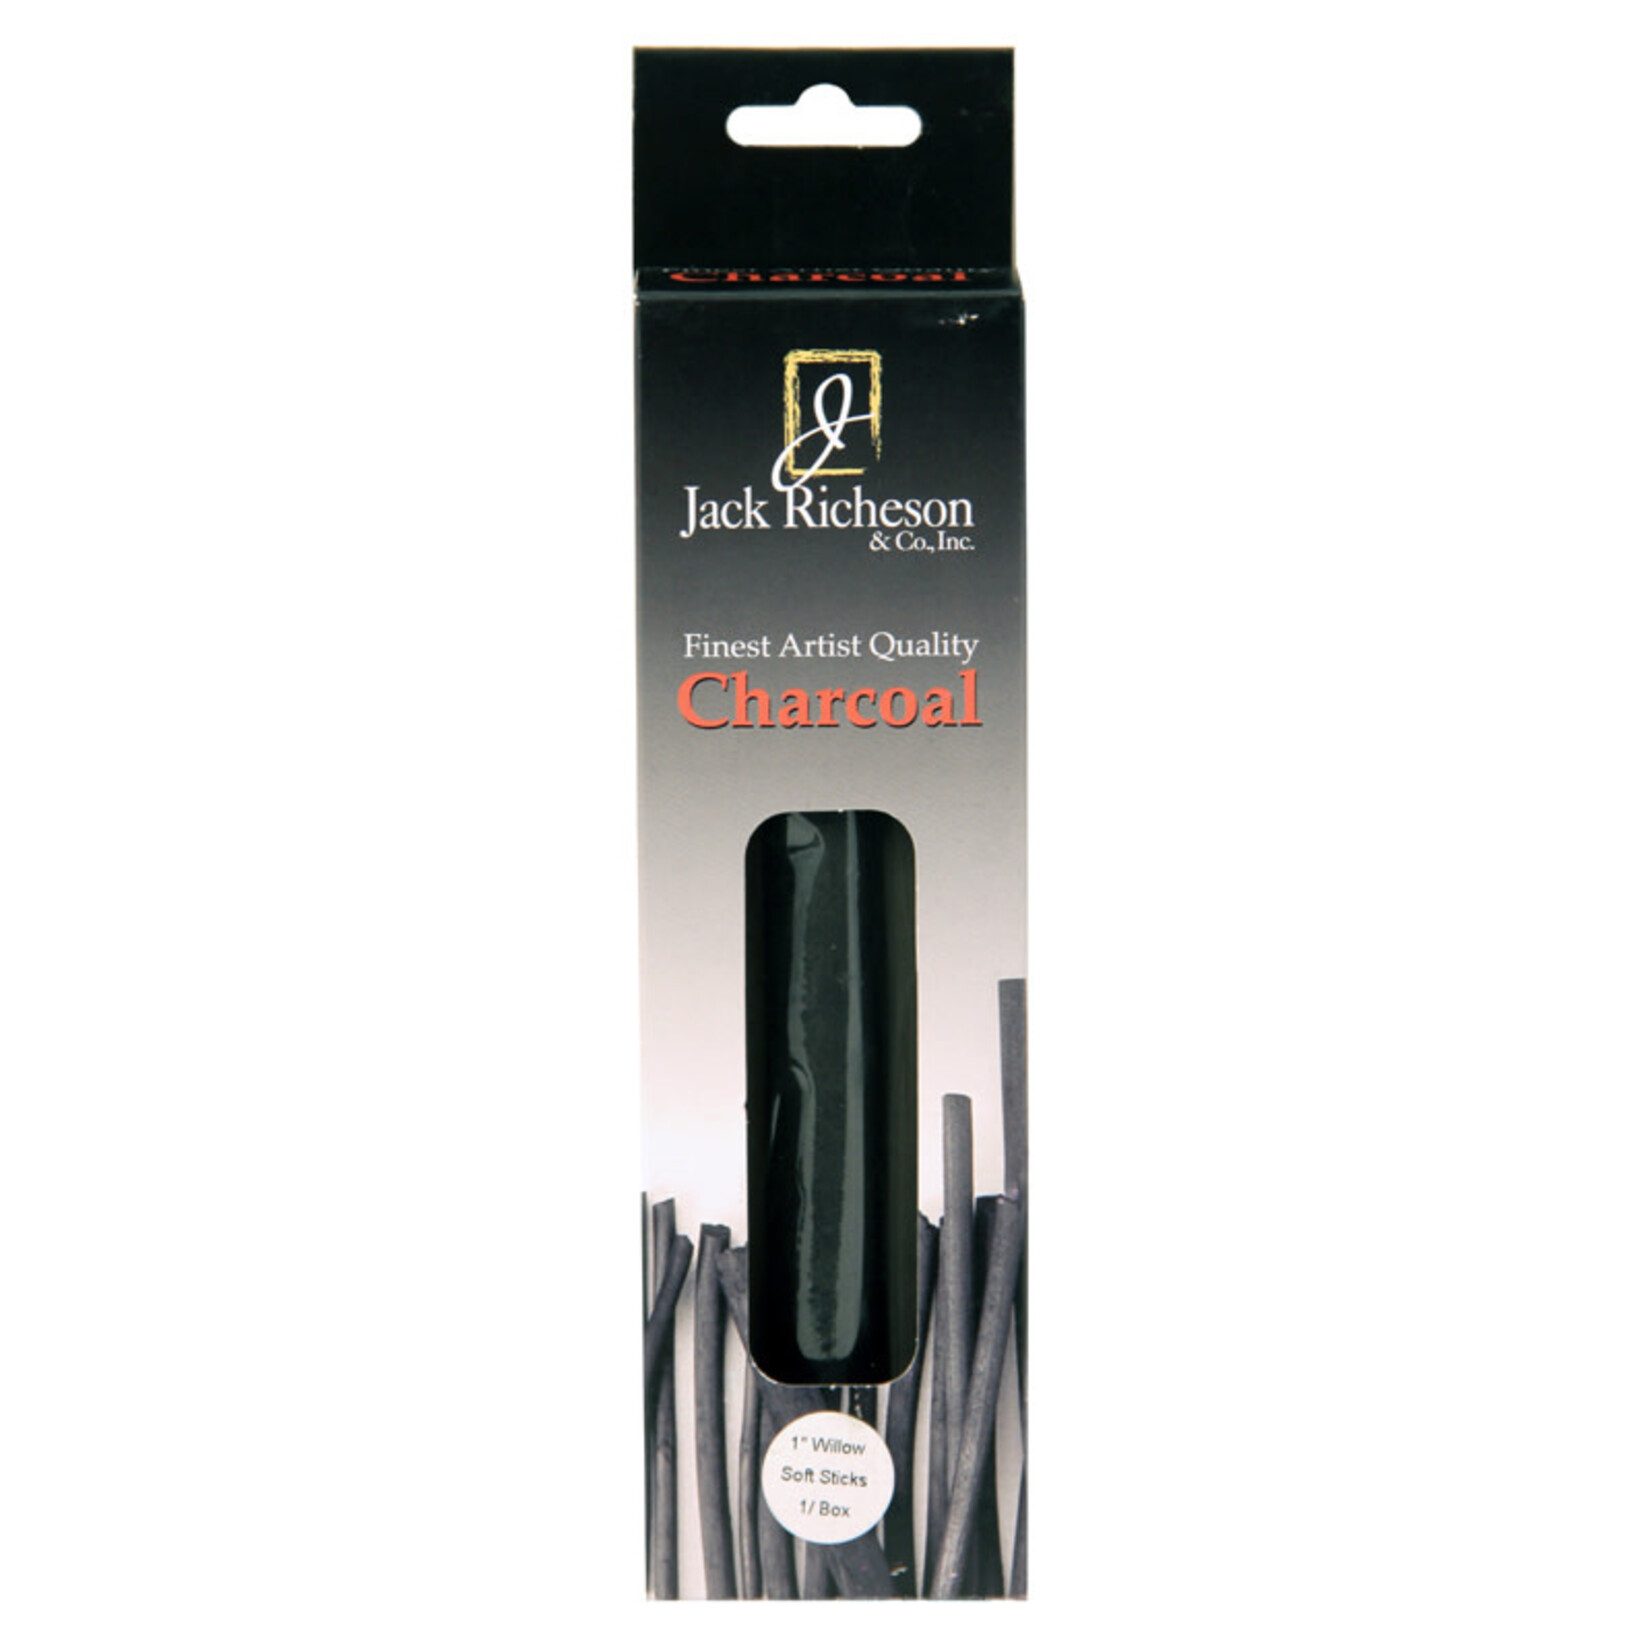 Jack Richeson Charcoal, 1'' Willow Soft Jumbo